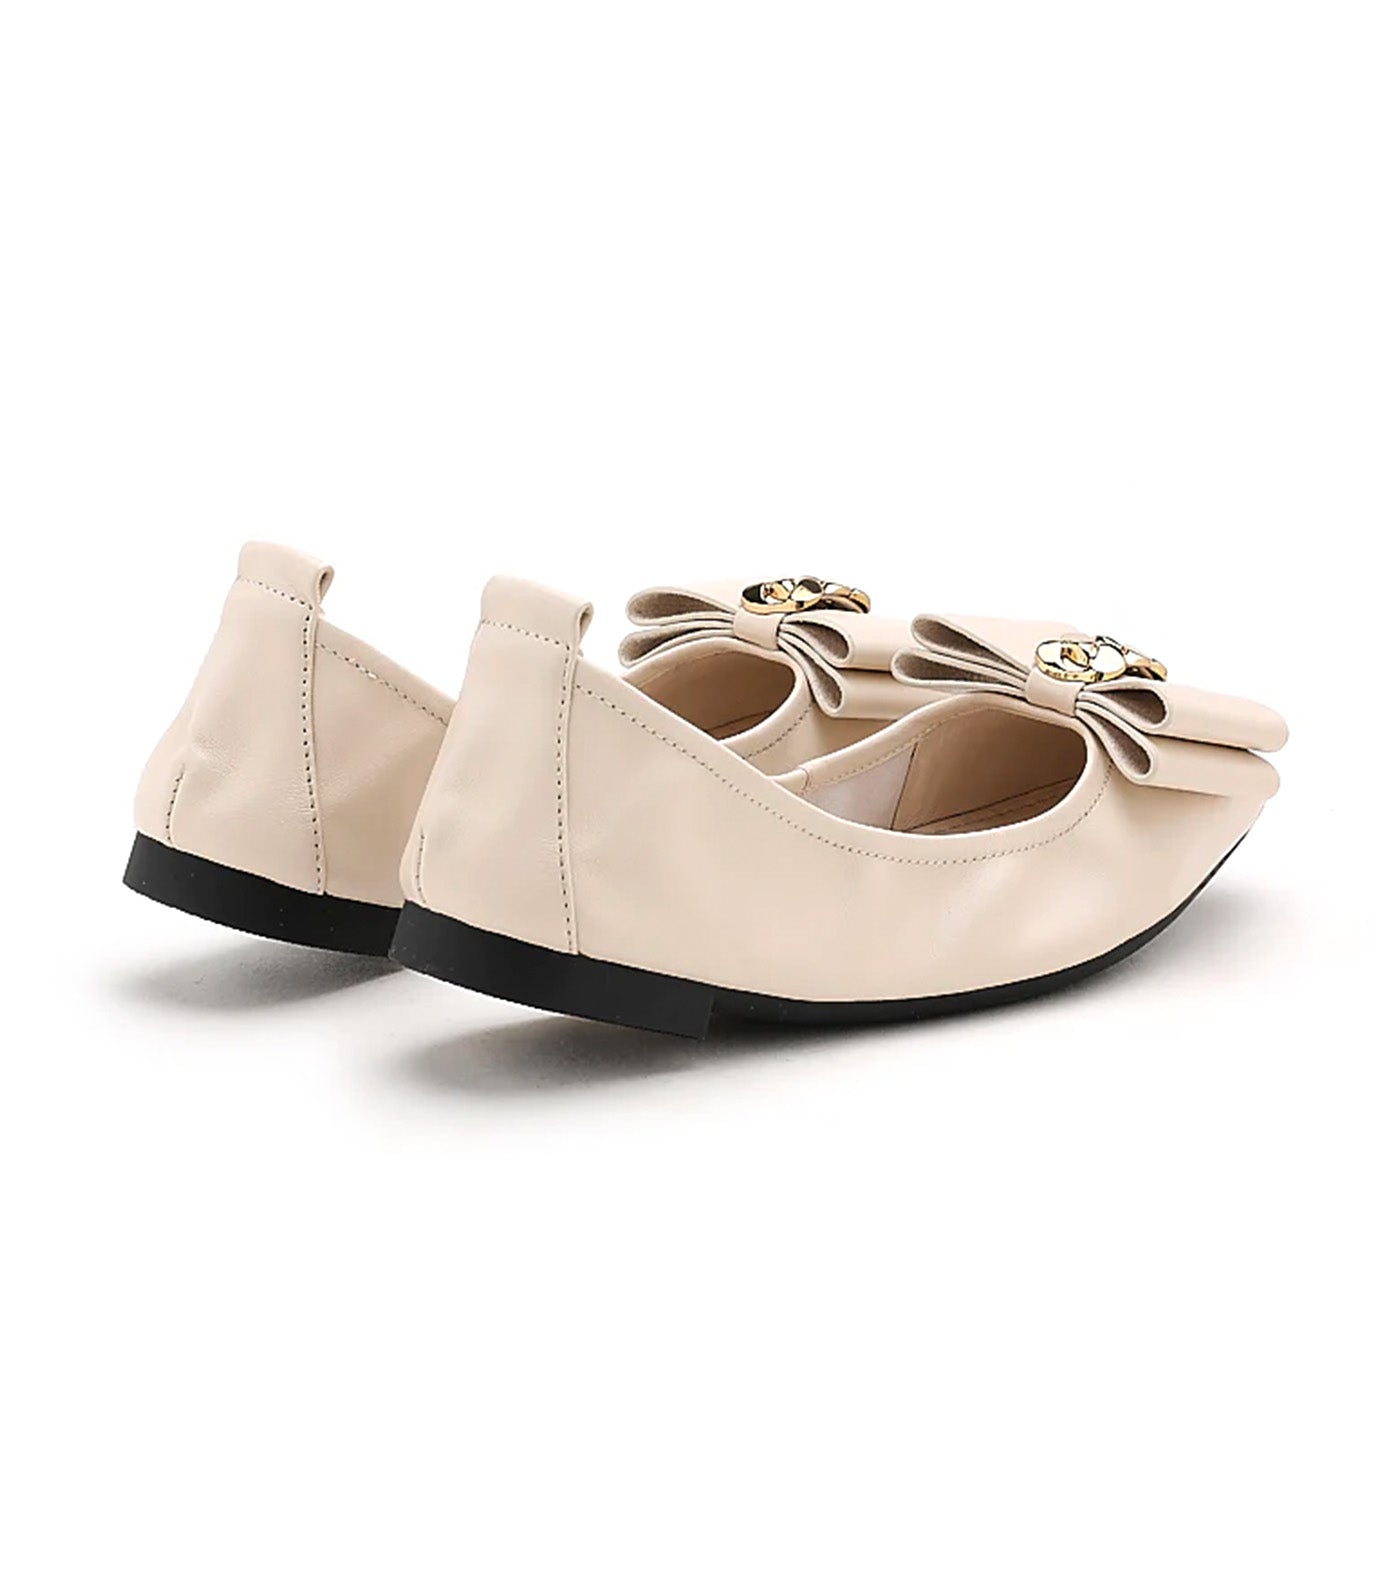 Candace Pop Of Bow Square Toe Foldable Flats Beige